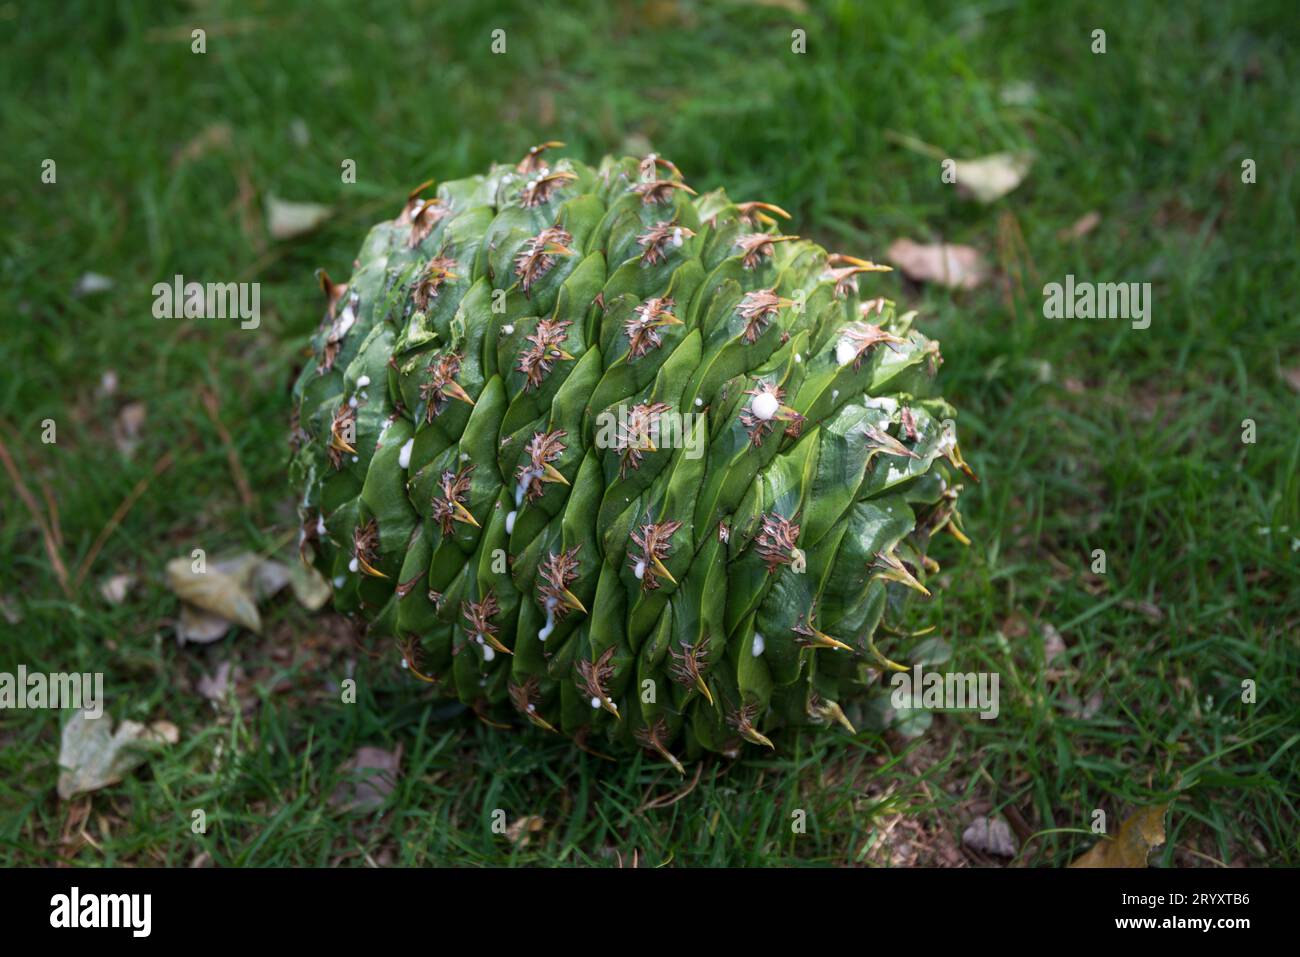 Intact green Bunya pine cone lying in the grass after having fallen from the tree Stock Photo